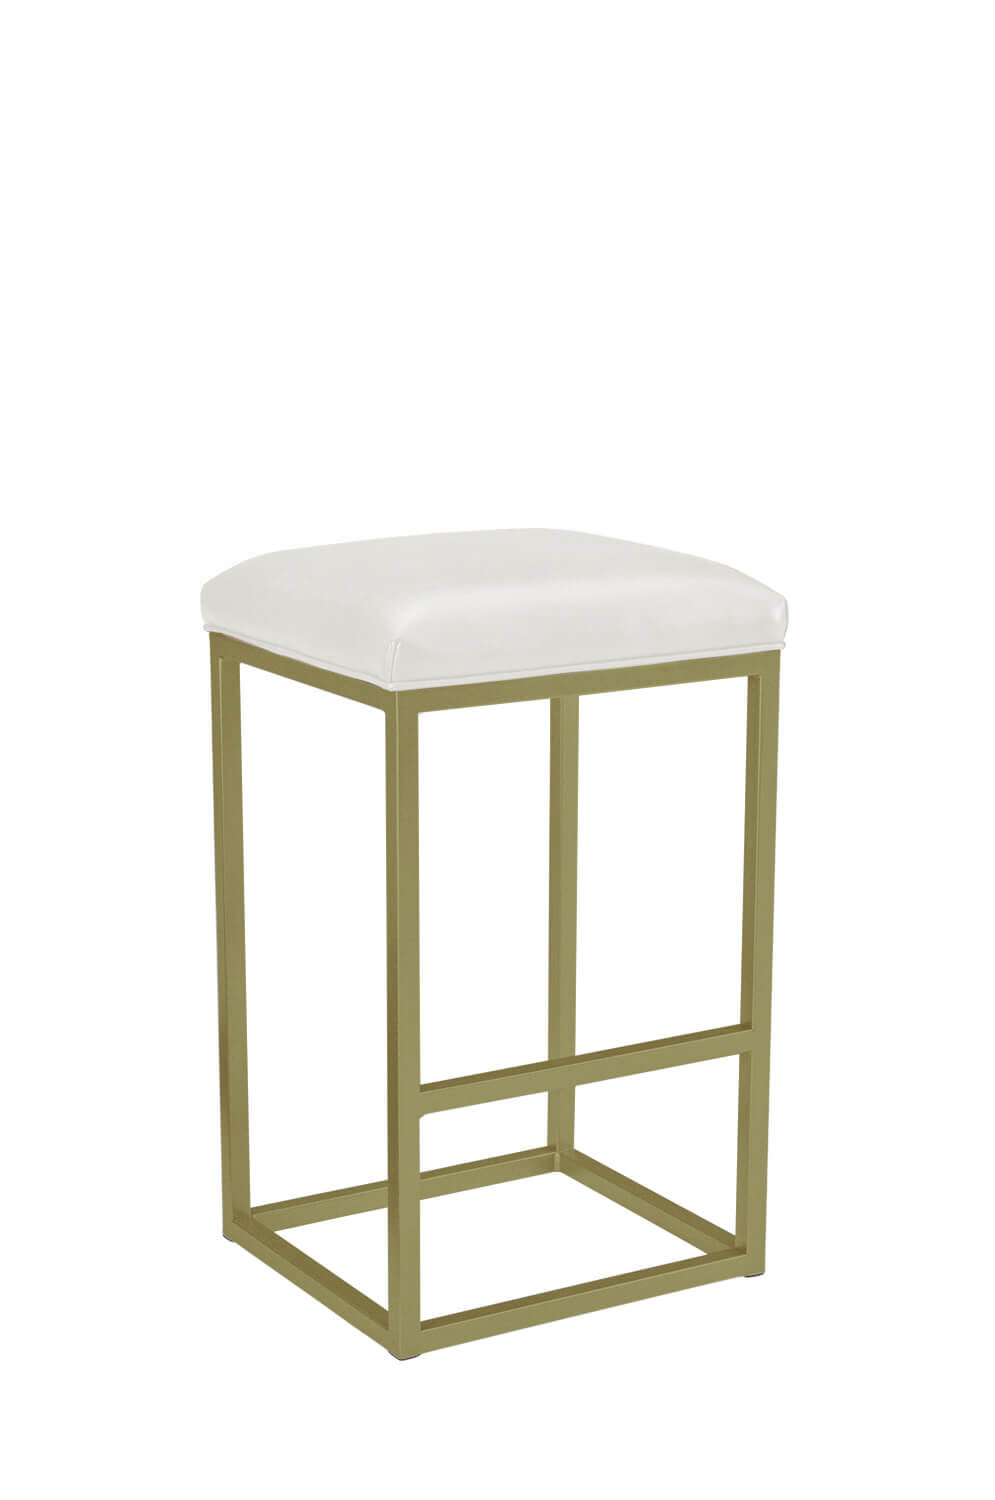 Leathercraft's Cosmo Gold Metal Backless Bar Stool with White Seat Cushion